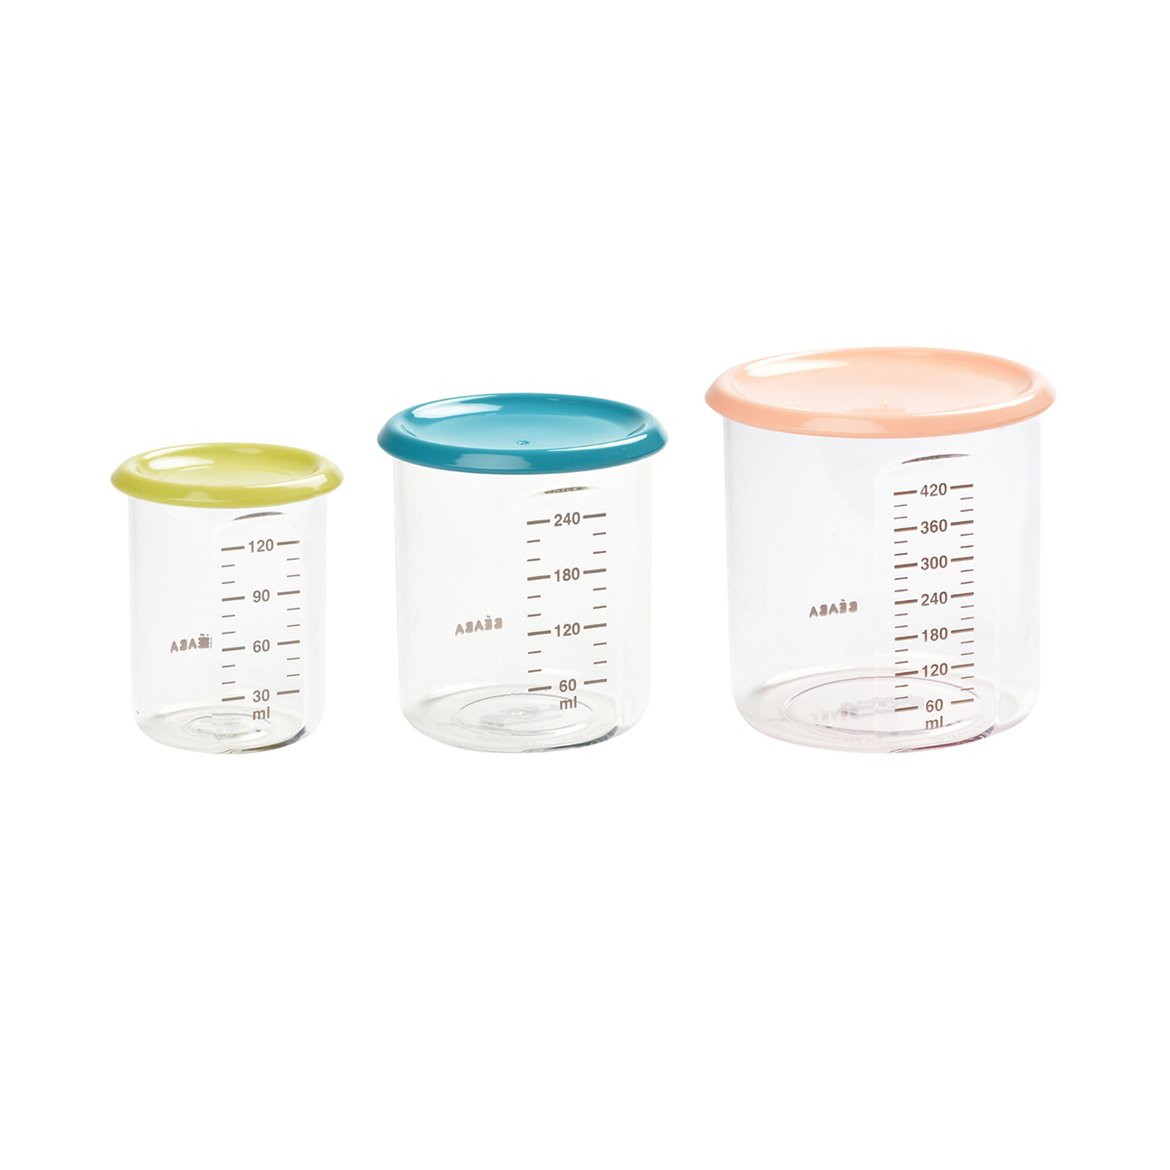 Set of 3 conservation jars (1 baby / 1 maxi / 1 maxi +) (assorted colors BLUE/NEON/NUDE)